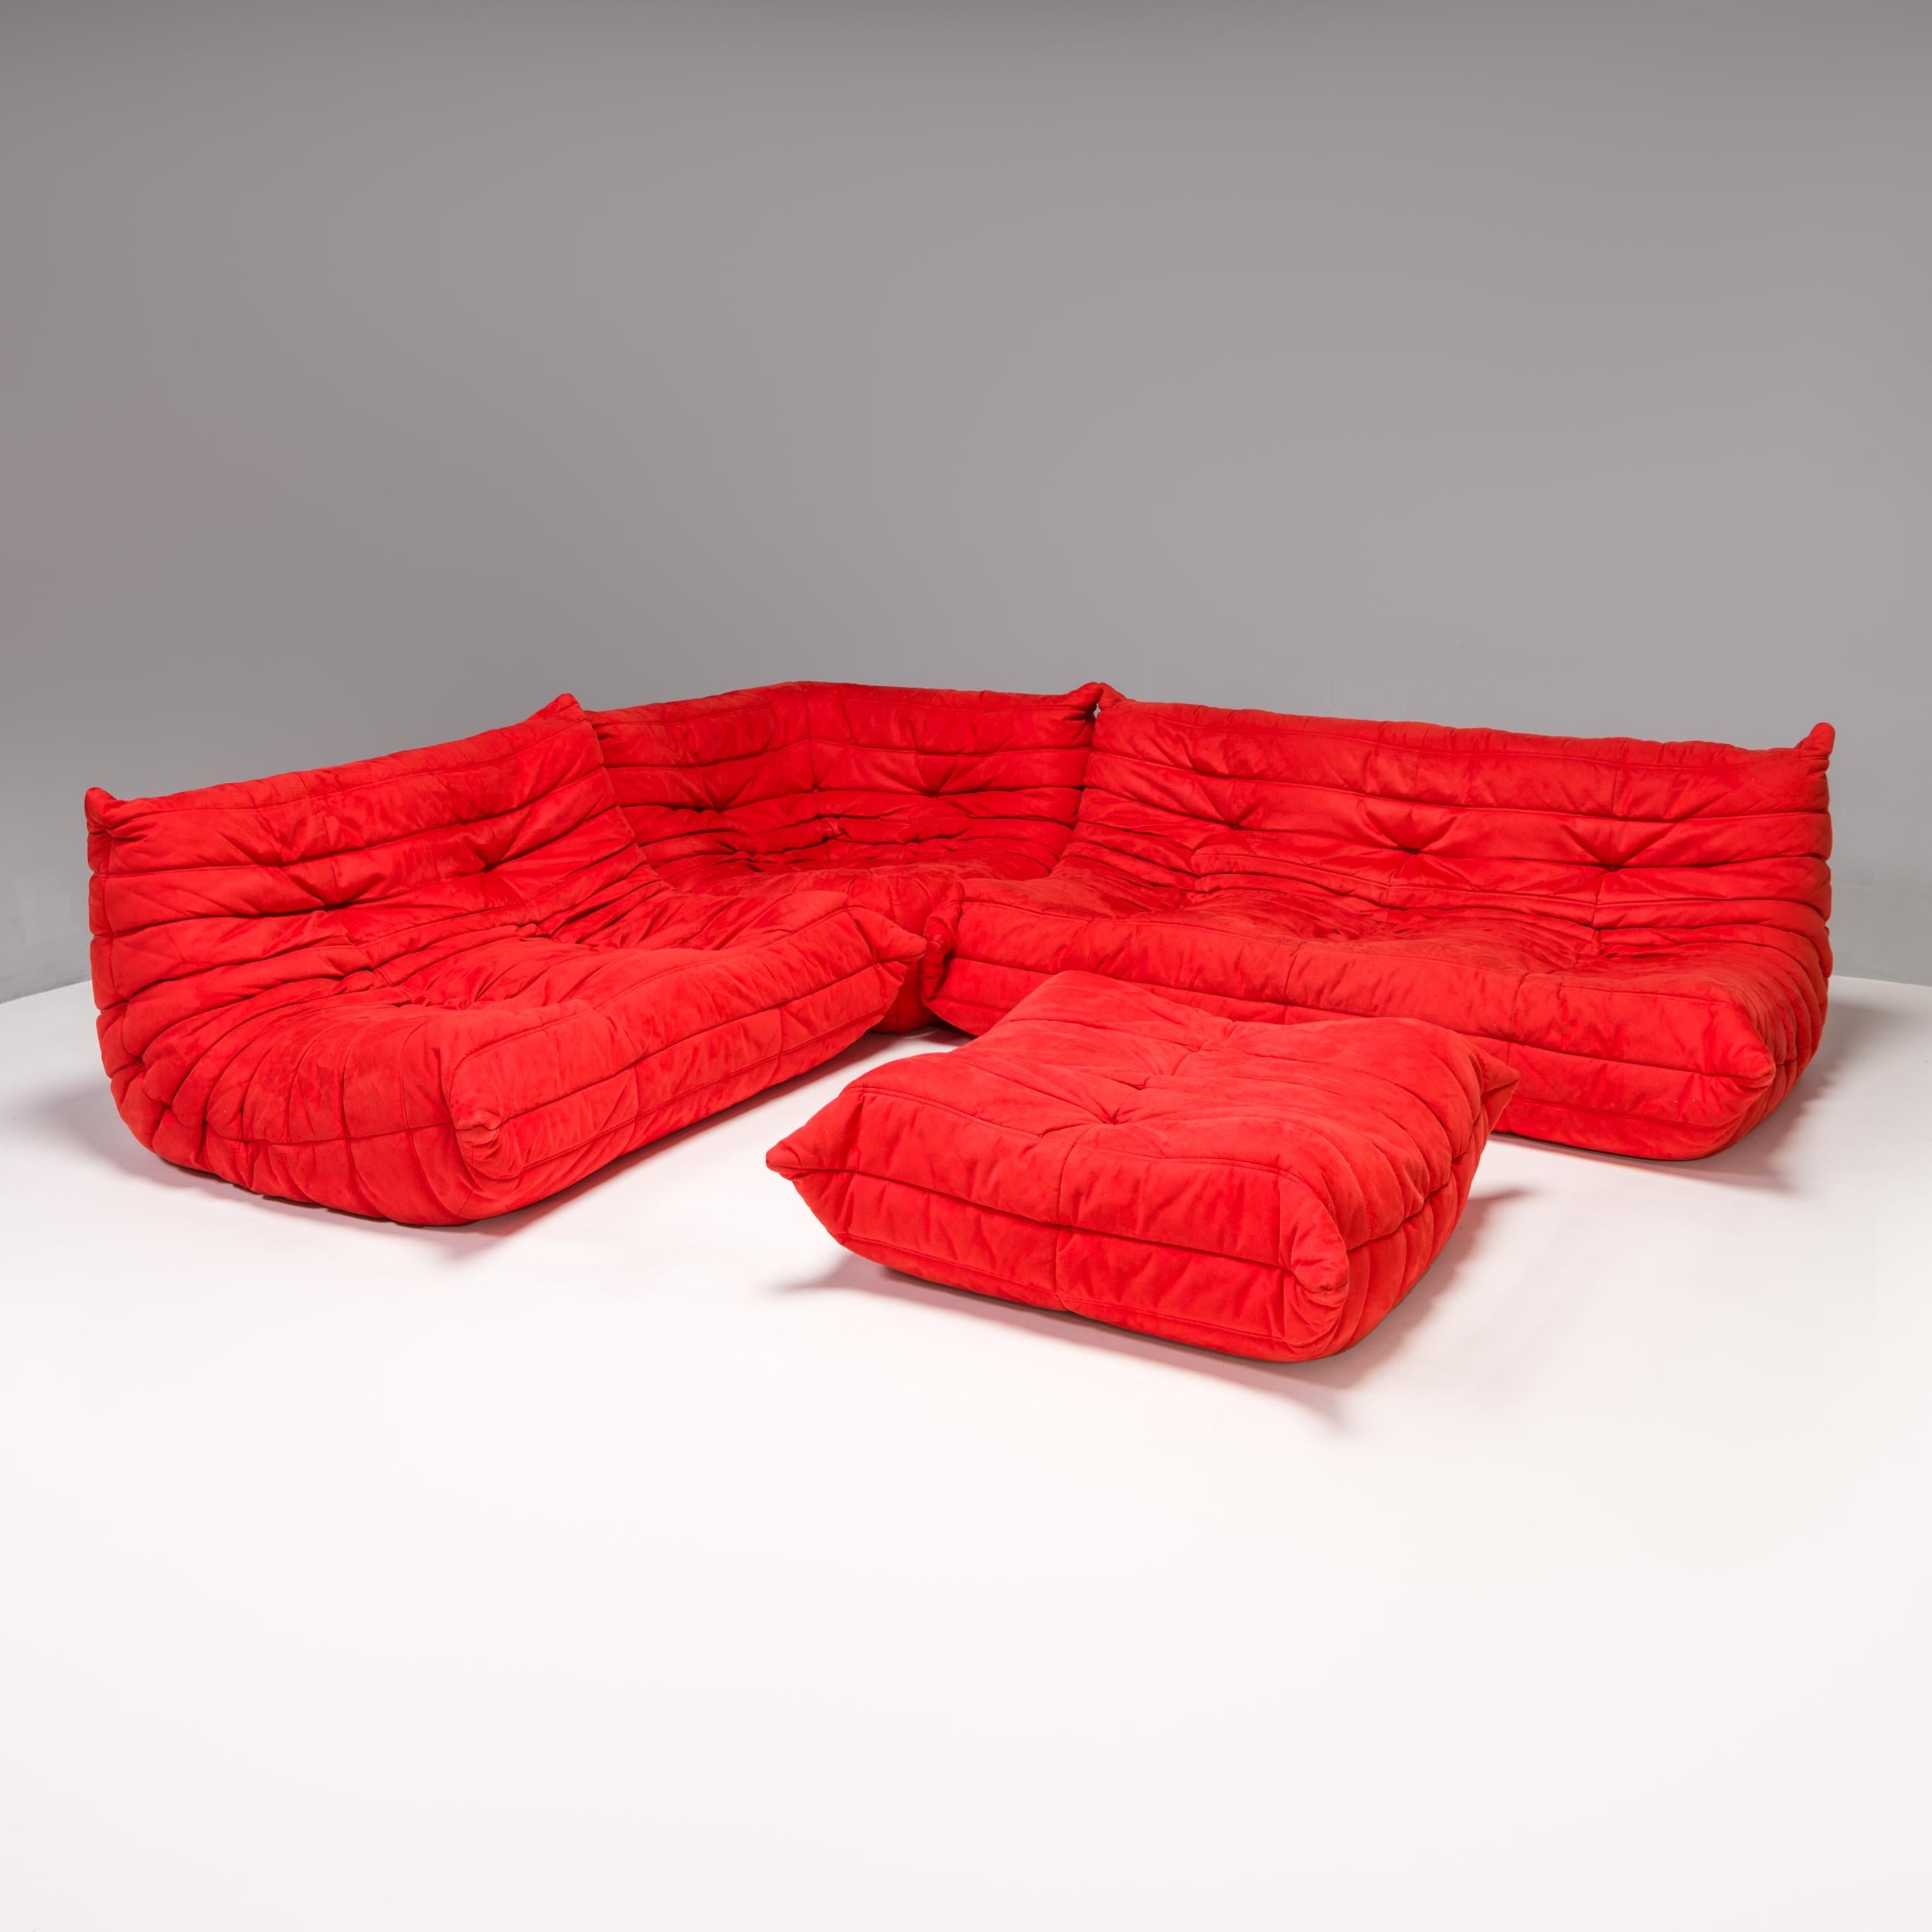 The iconic Togo sofa, originally designed by Michel Ducaroy for Ligne Roset in 1973, has become a design classic.

This four-piece modular set is incredibly versatile and can be configured into one large corner sofa or split for a multitude of